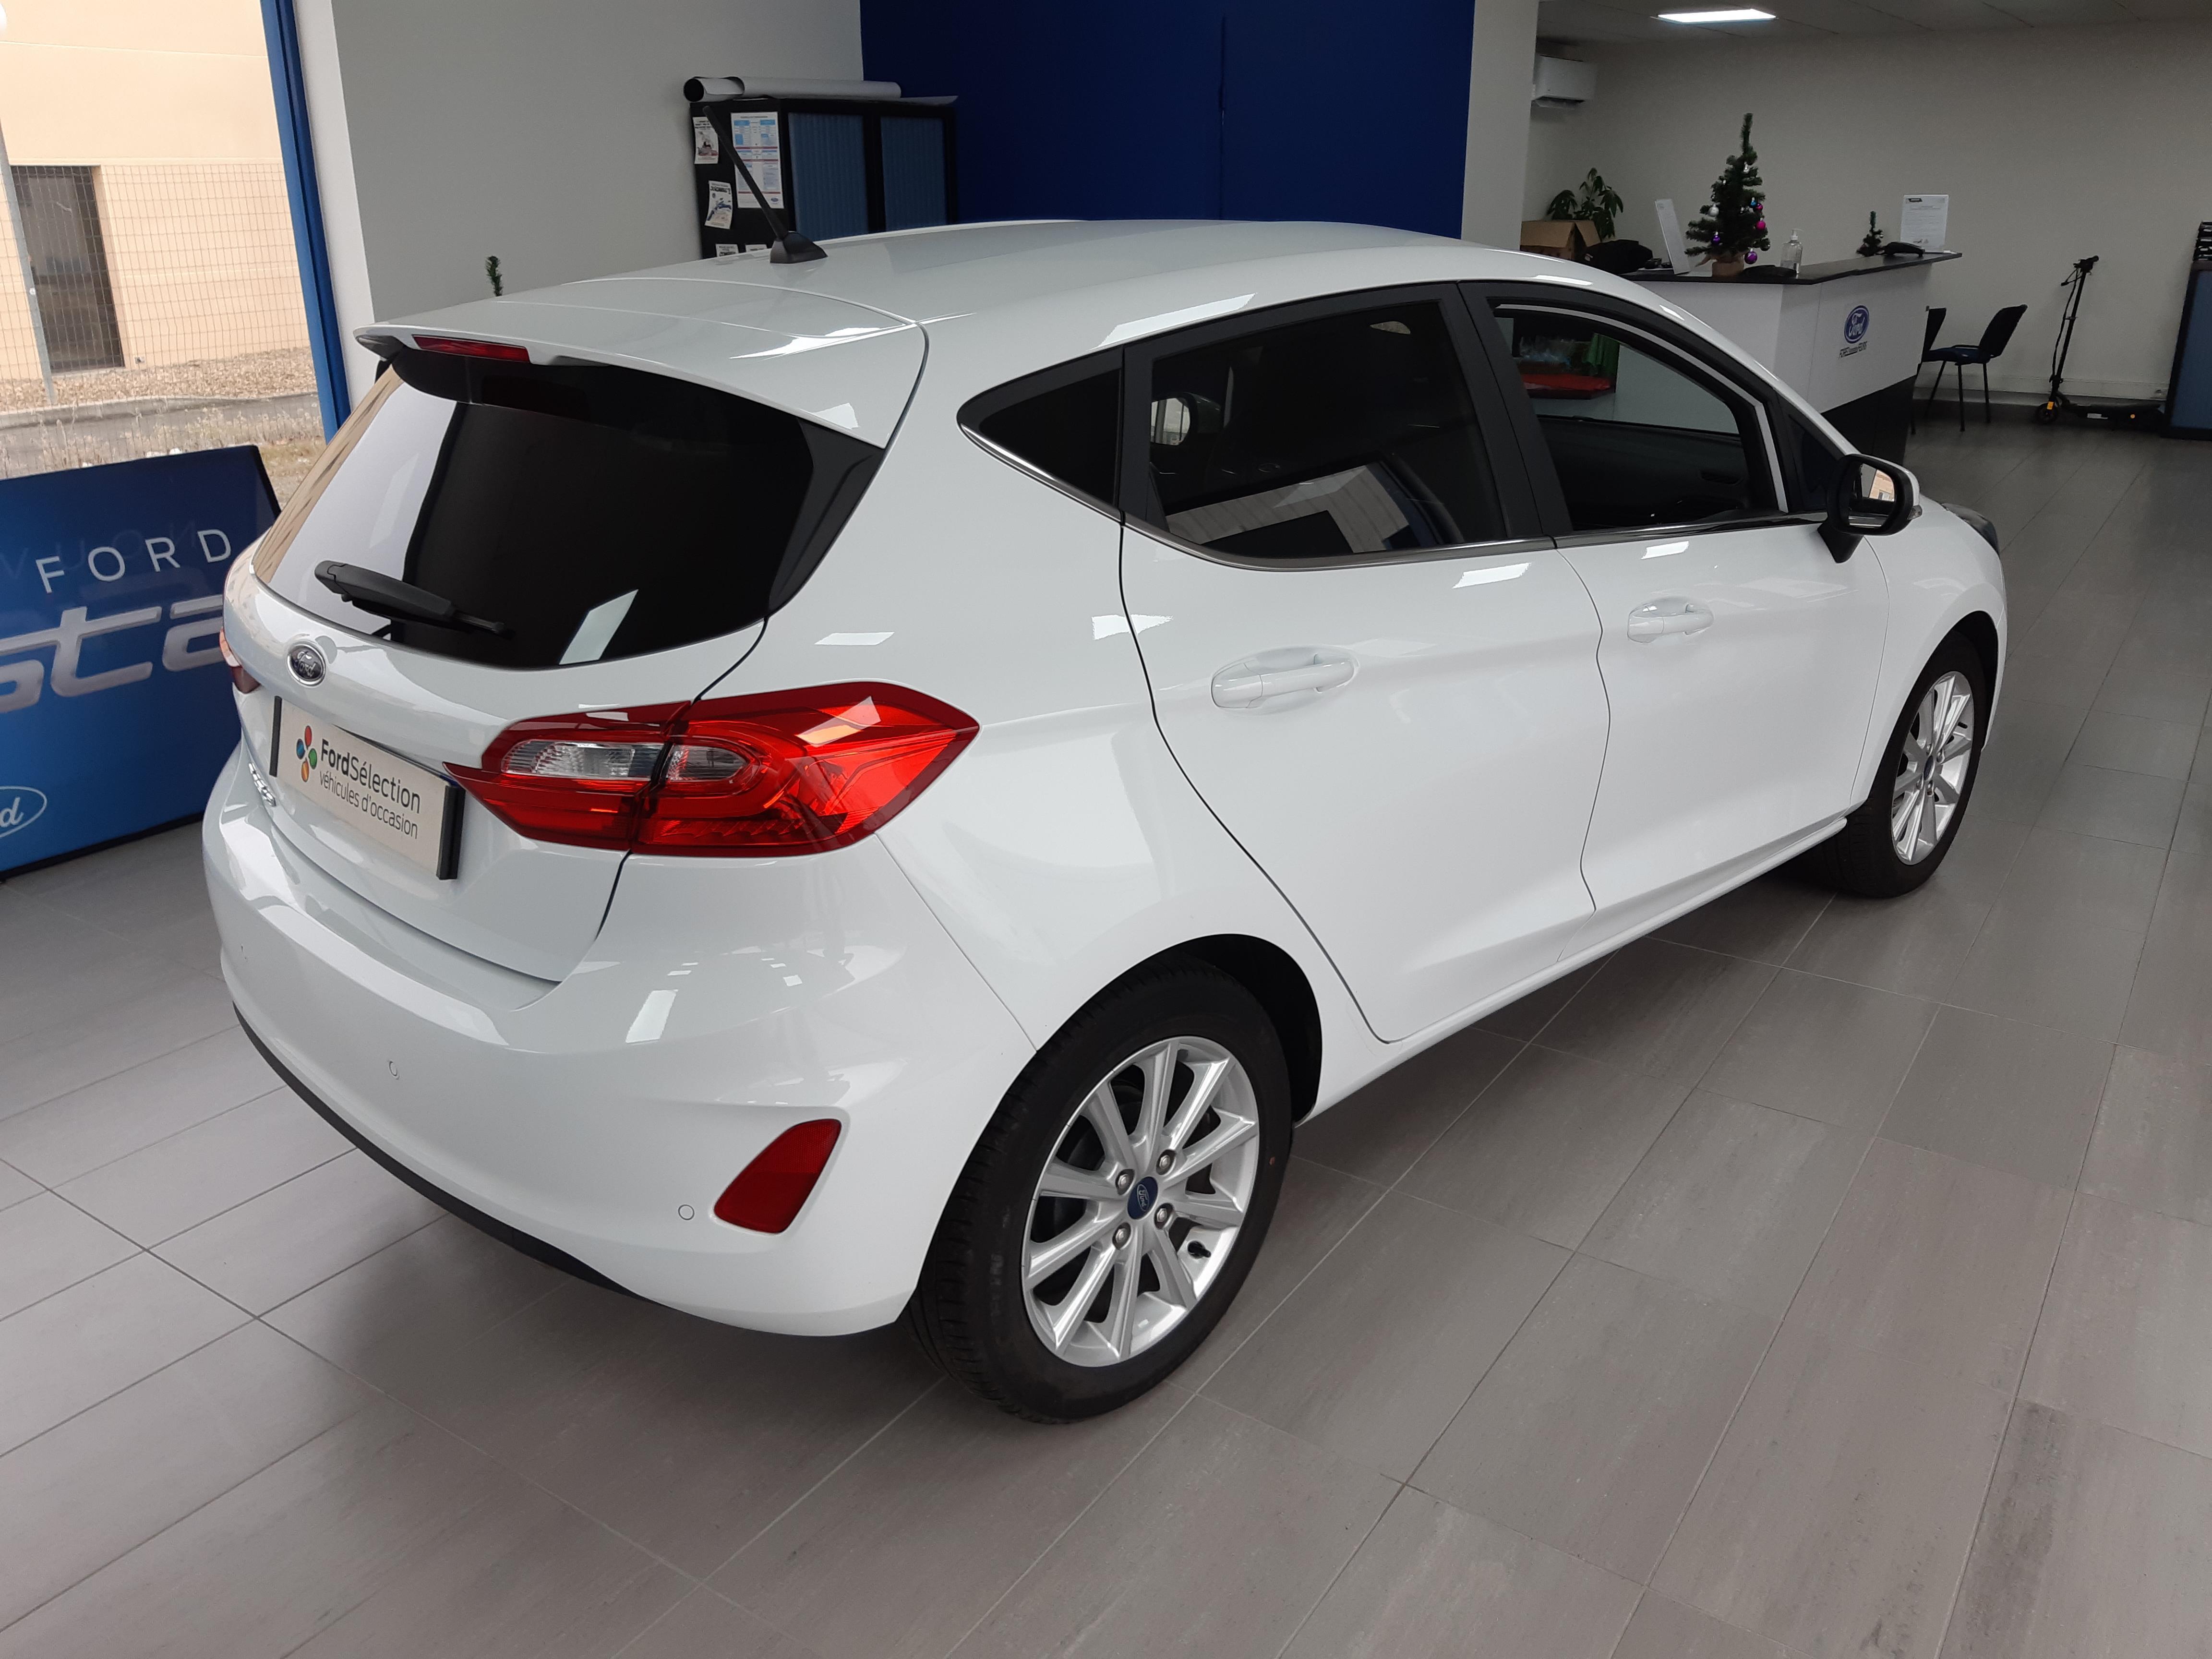 Ford FIESTA 1.0 ECOBOOST 100ch TITANIUM - Site Officiel Ford [concession]  Véhicules d'Occasion [ville]